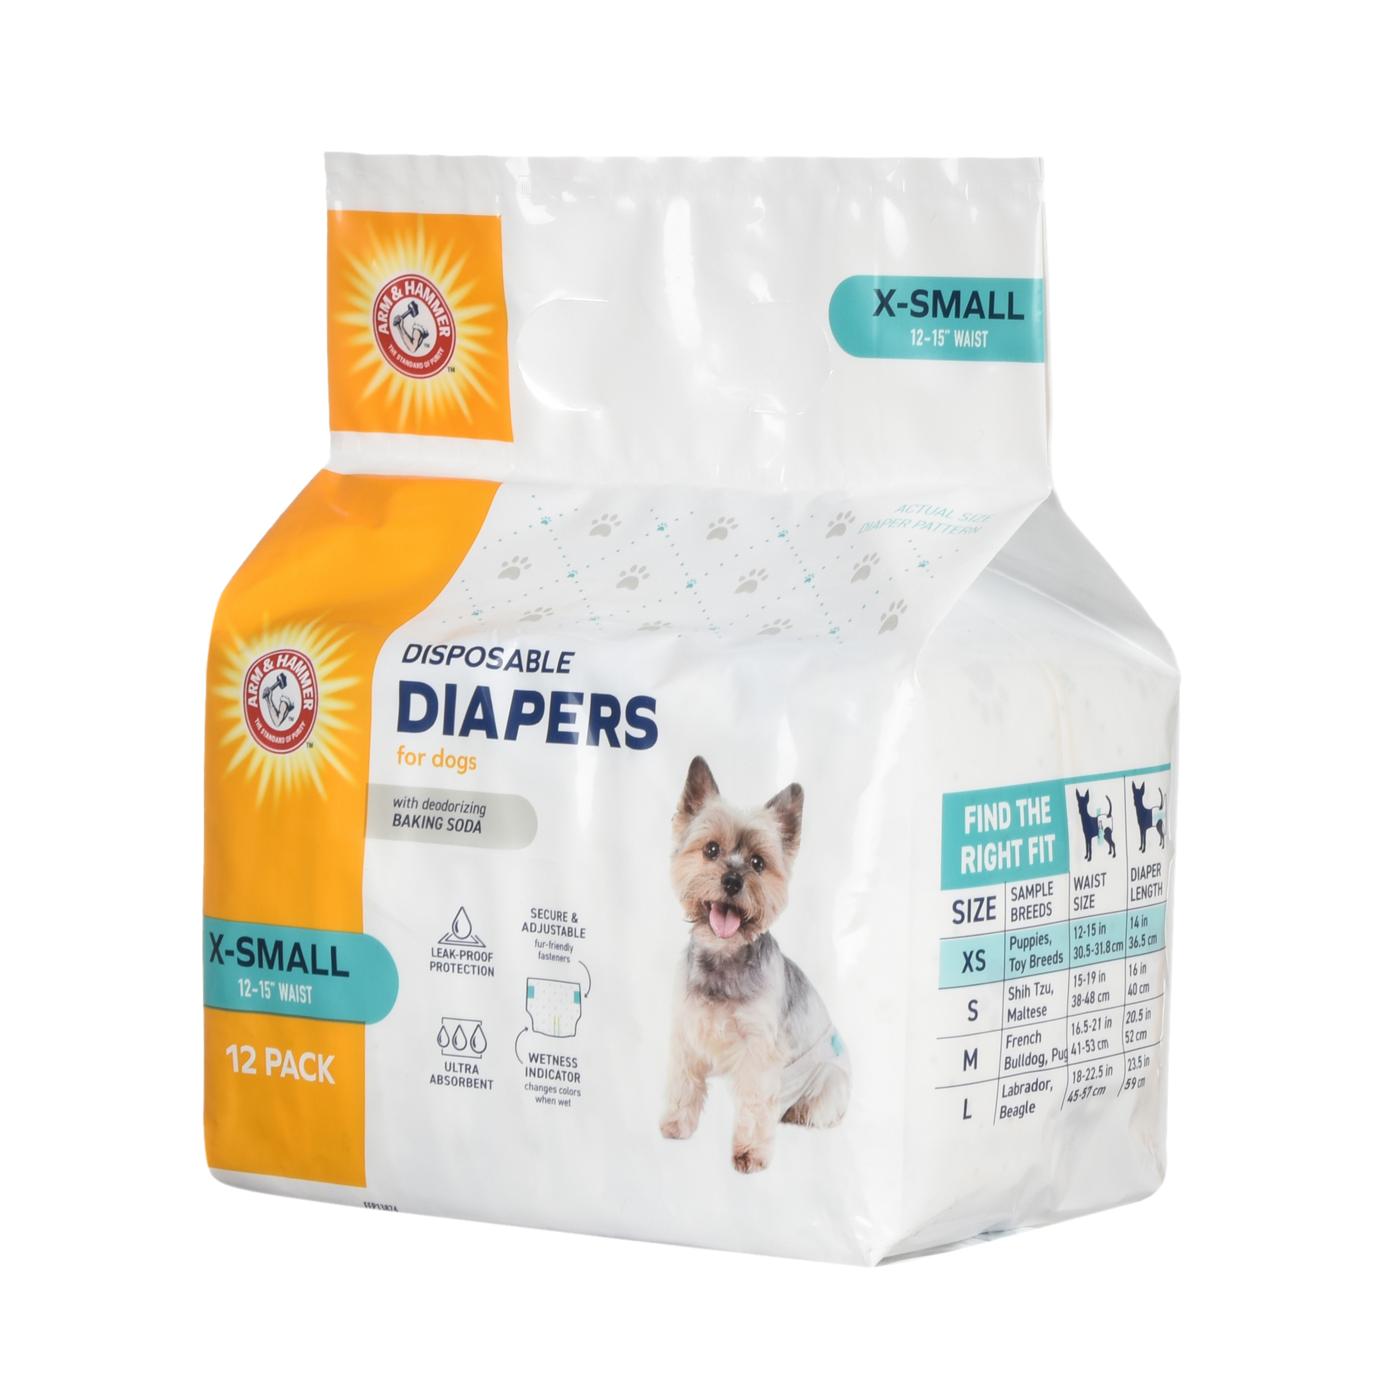 Arm & Hammer Disposable Dog Diapers - X-Small; image 2 of 3